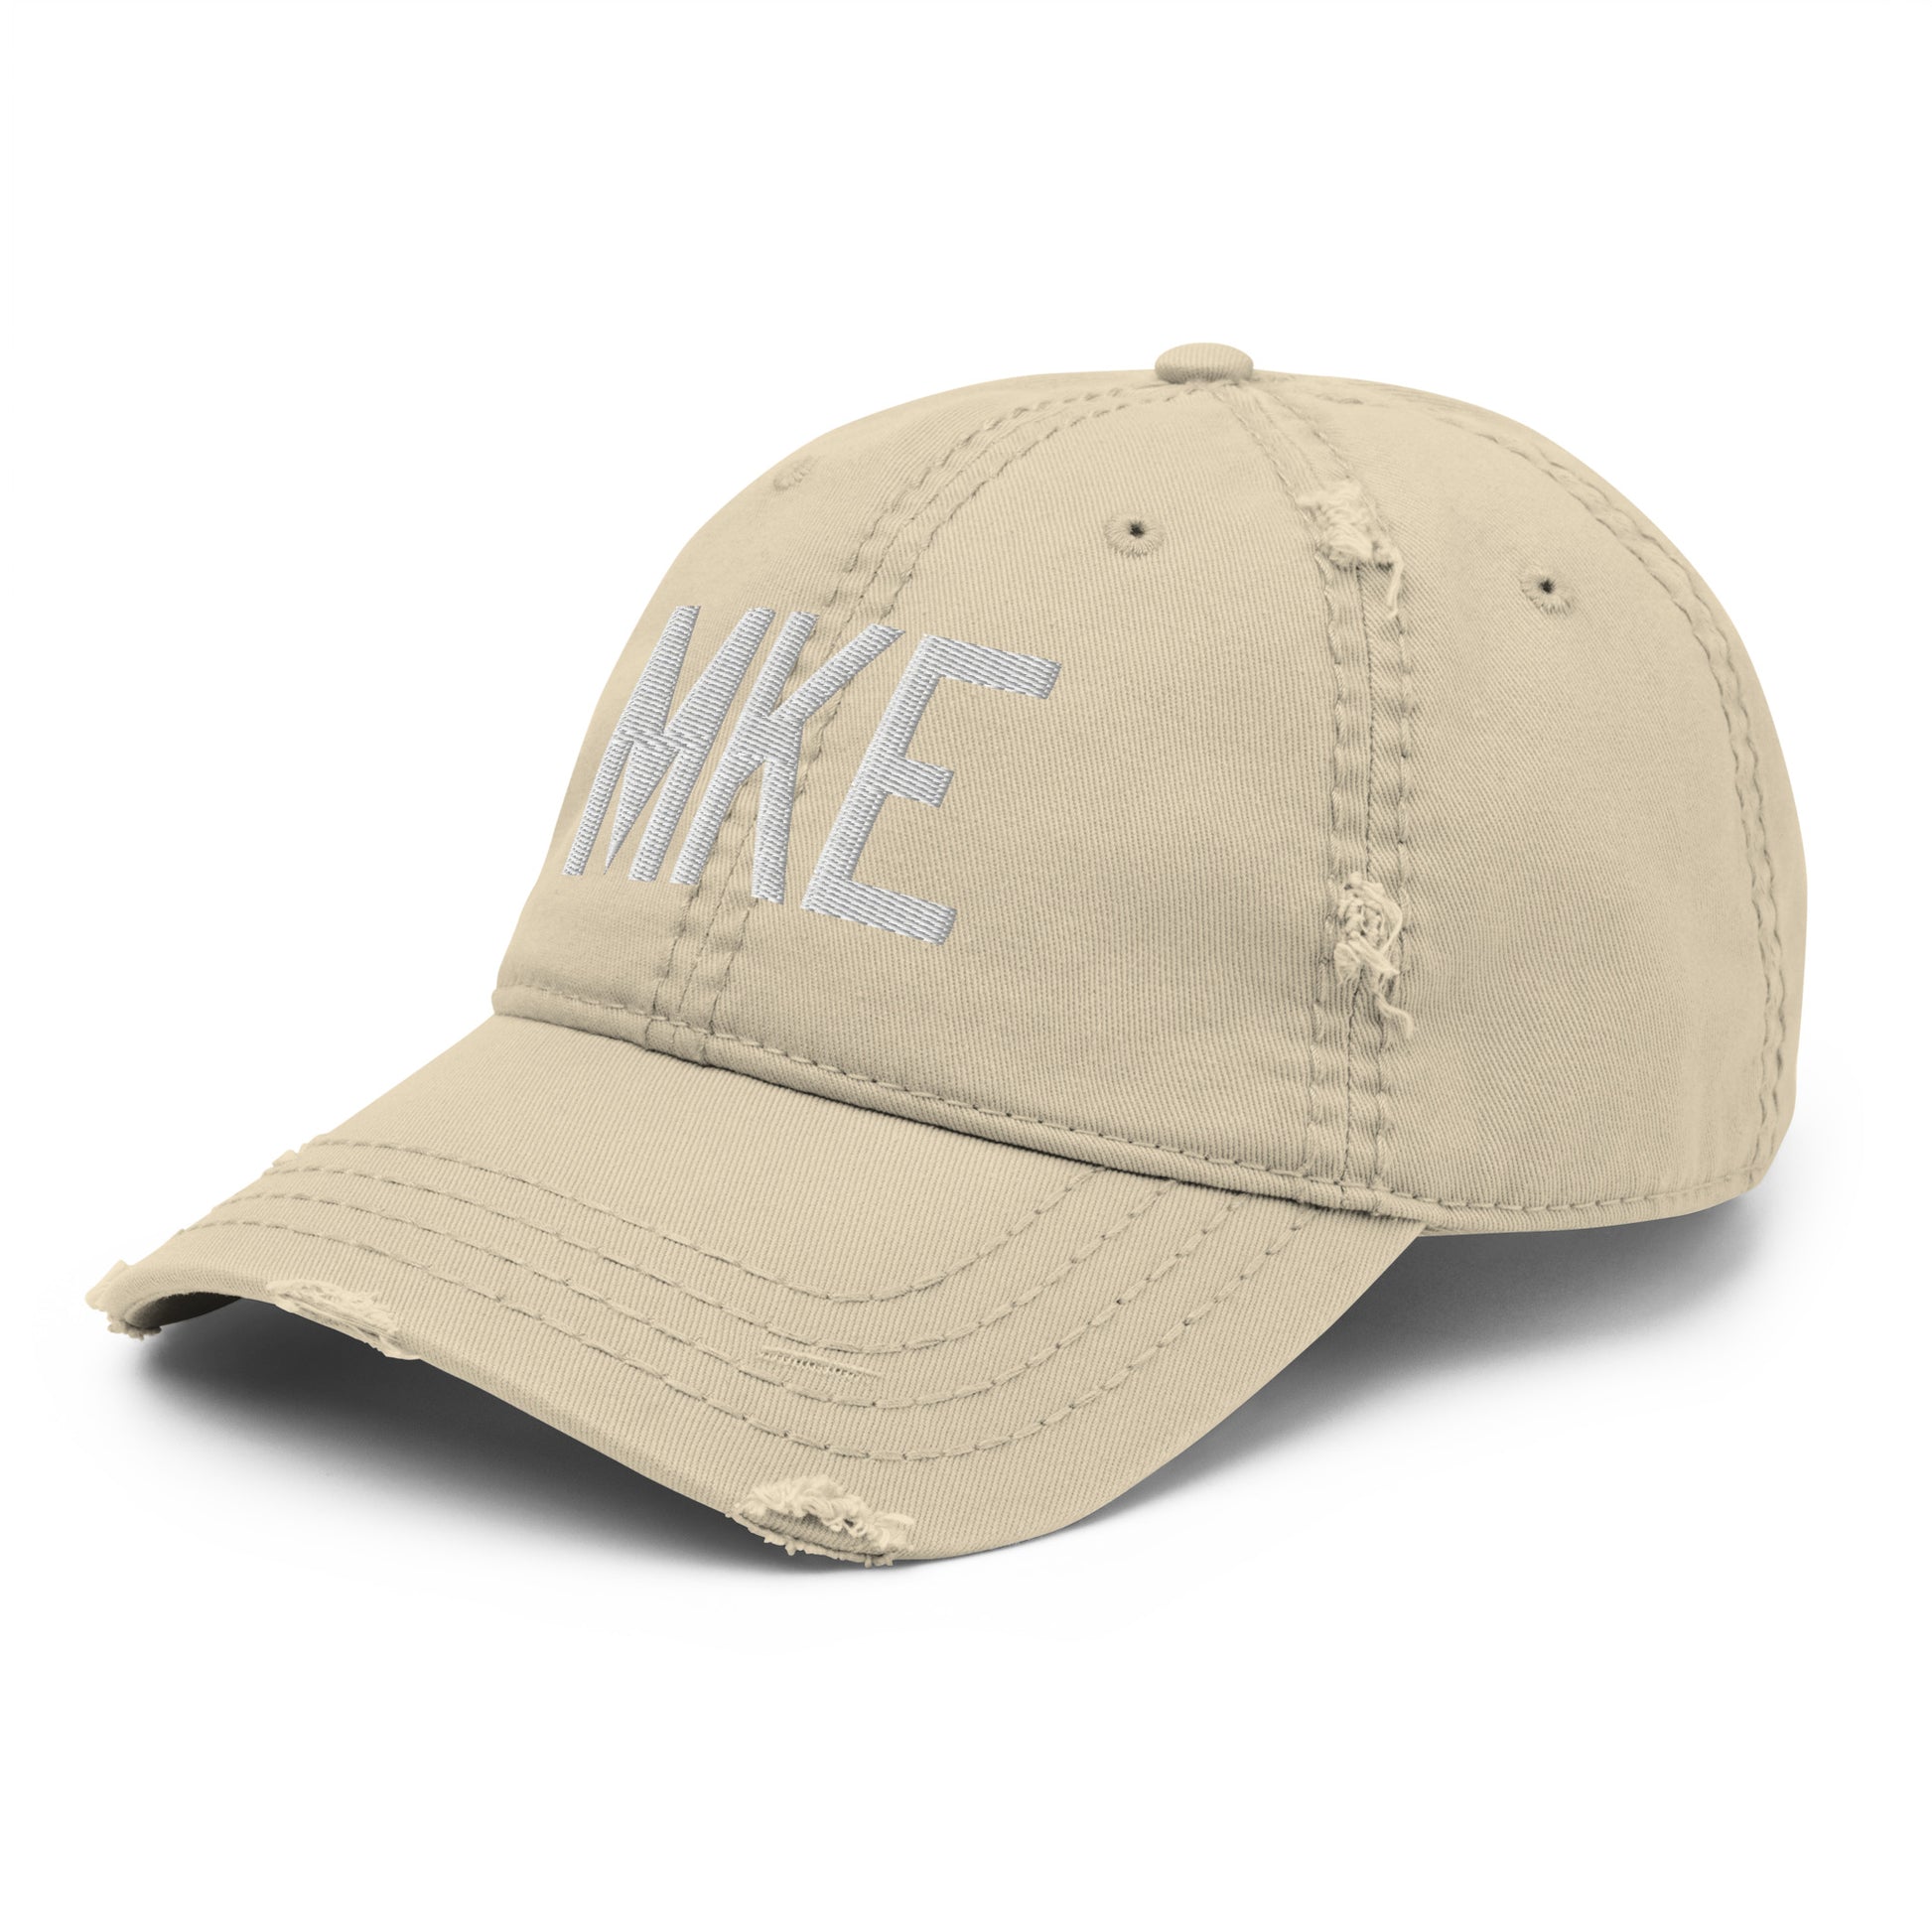 Airport Code Distressed Hat - White • MKE Milwaukee • YHM Designs - Image 19